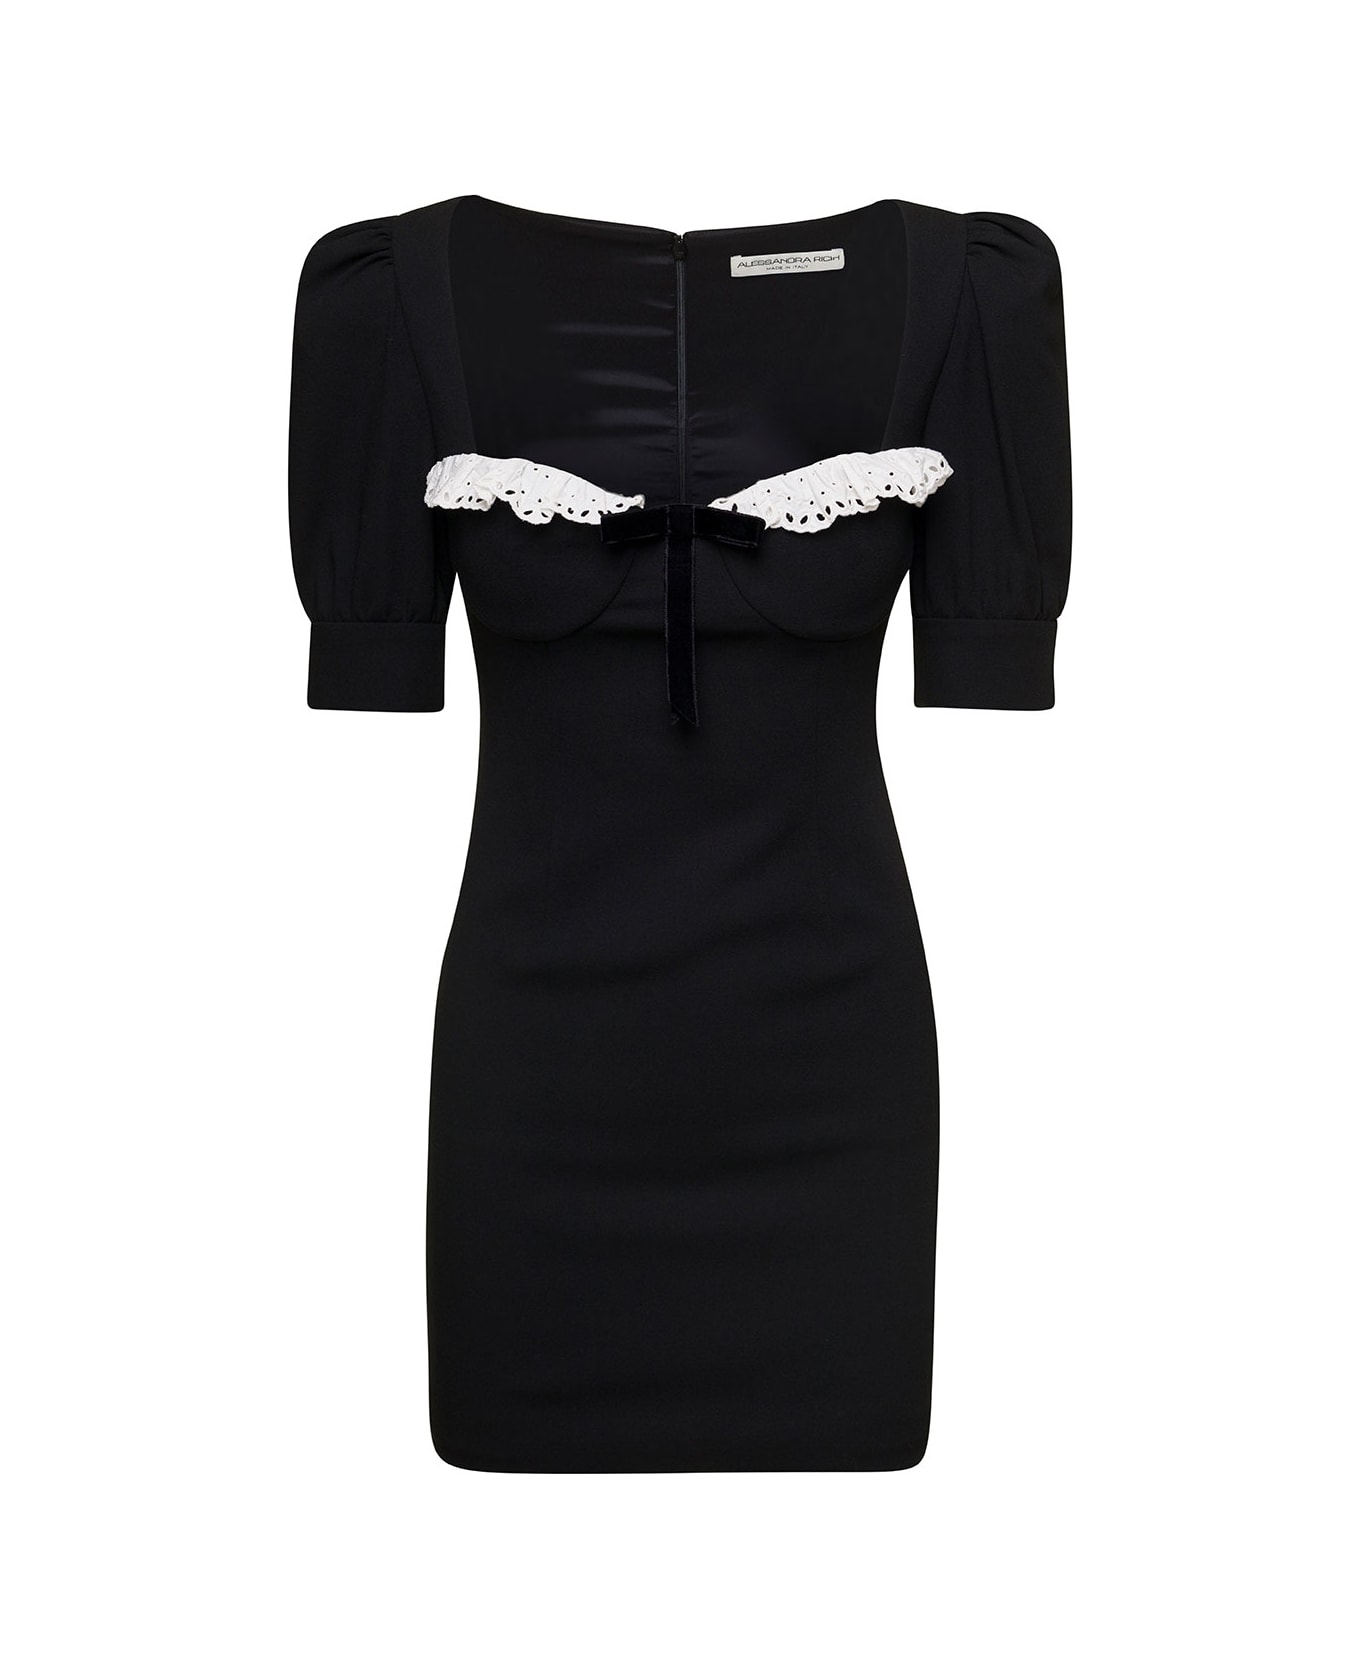 Alessandra Rich Black Mini Dress With Lace Detail On The Front In Wool Woman - Black